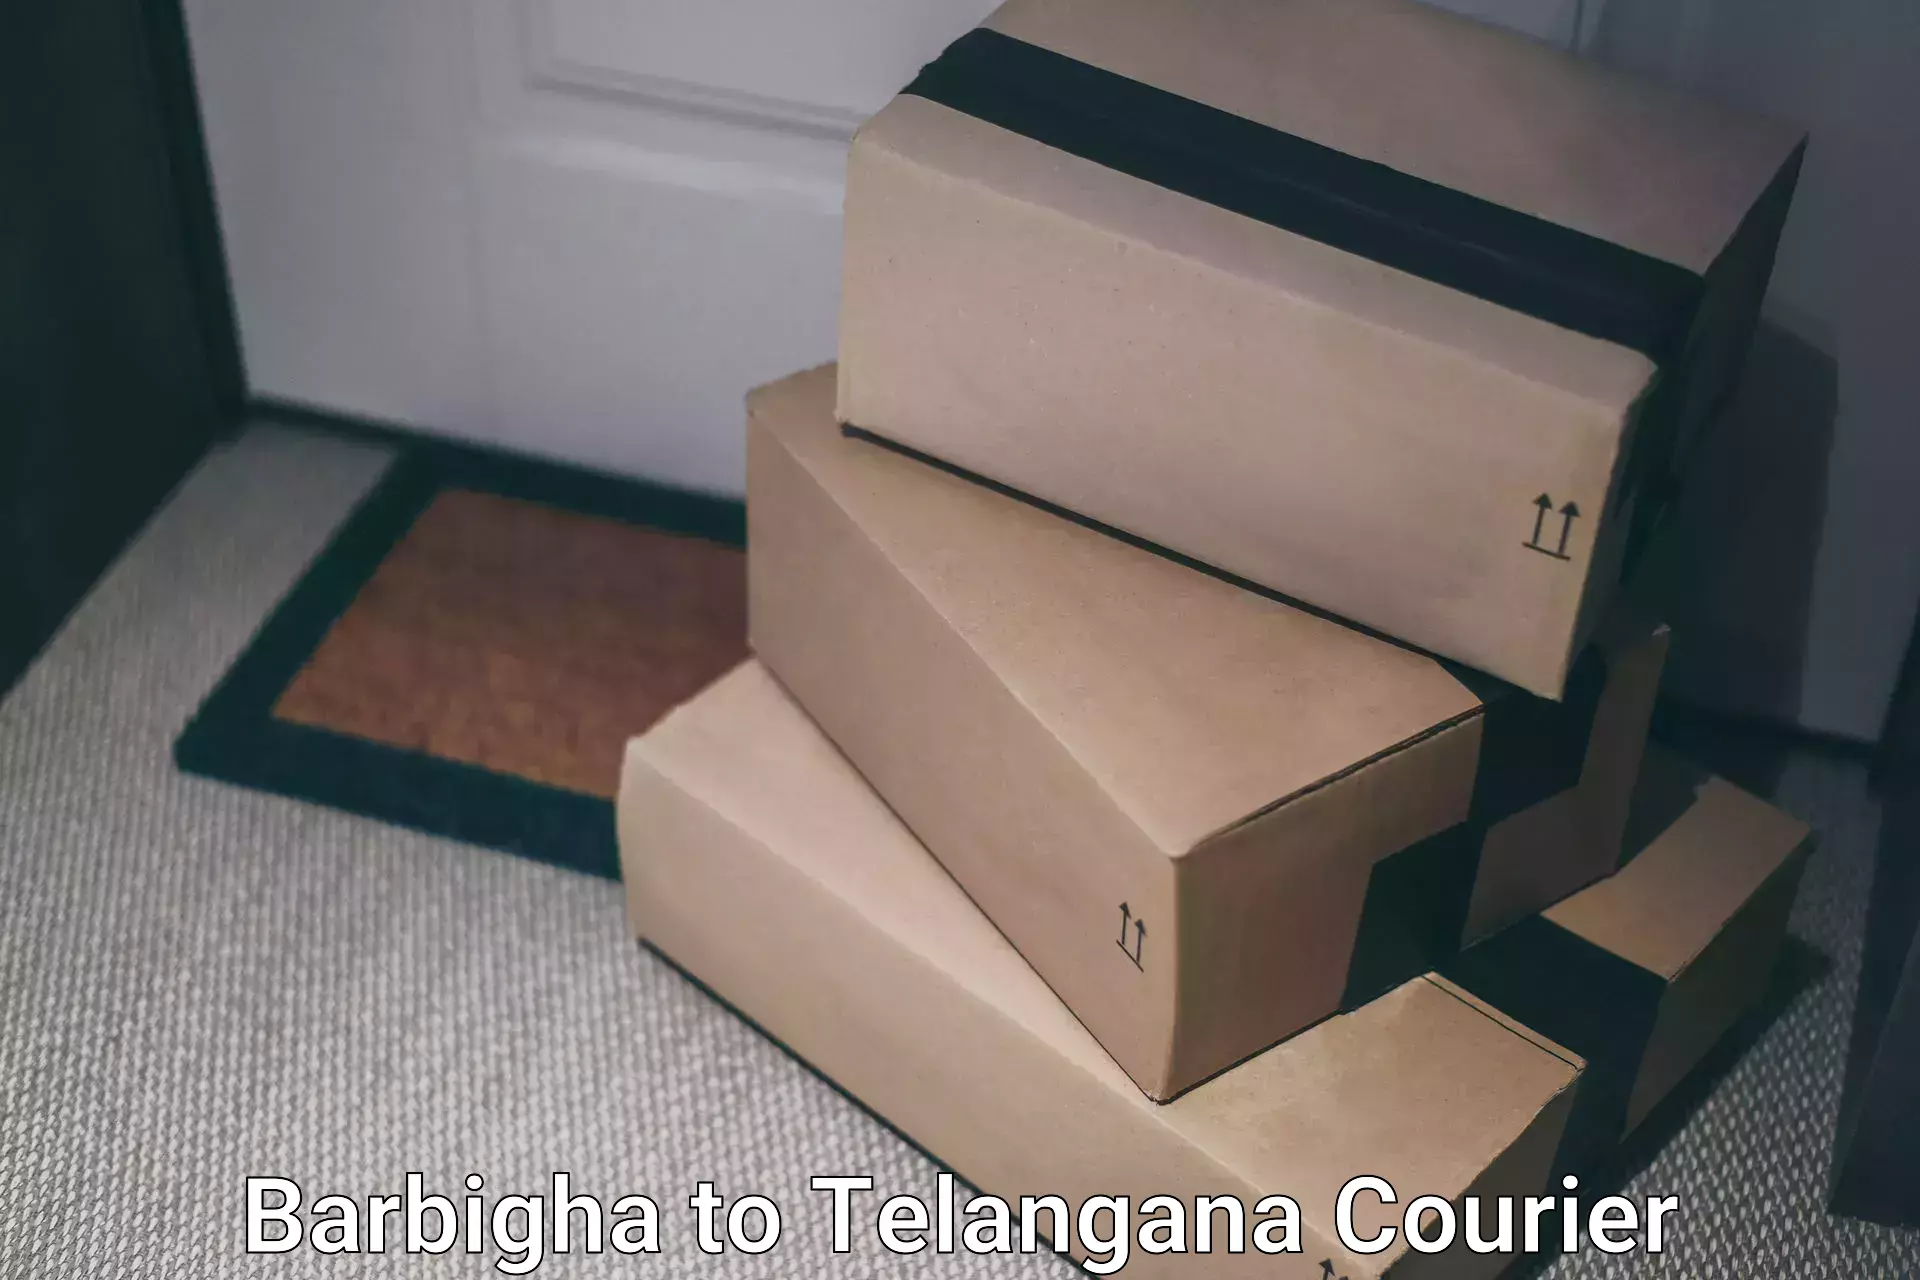 Reliable shipping partners in Barbigha to Vemulawada